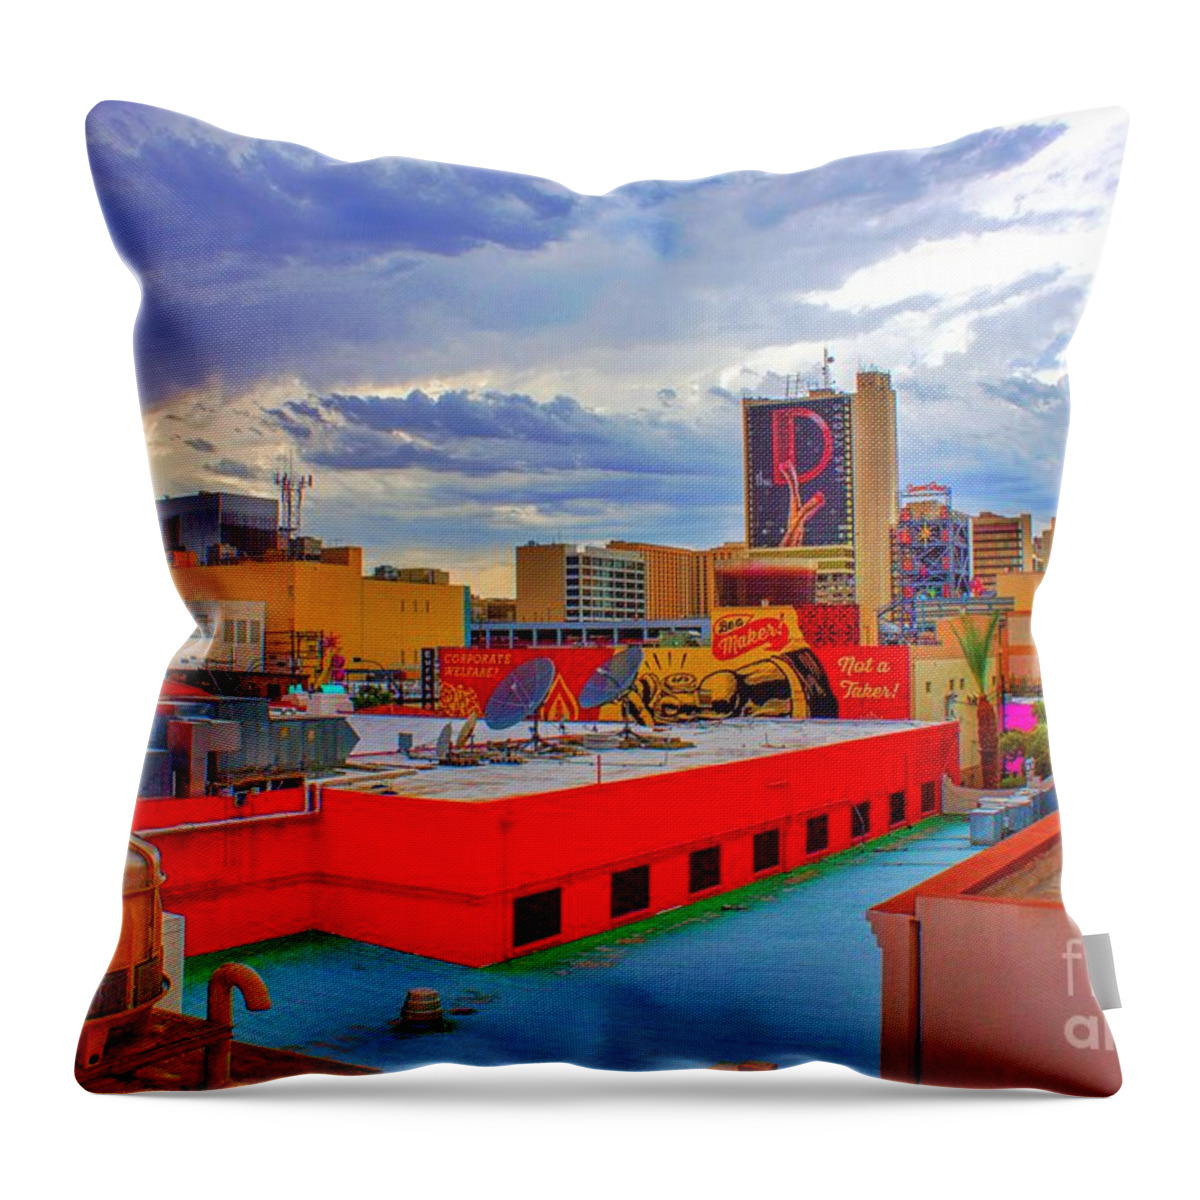  Throw Pillow featuring the photograph Las Vegas Daydream by Rodney Lee Williams